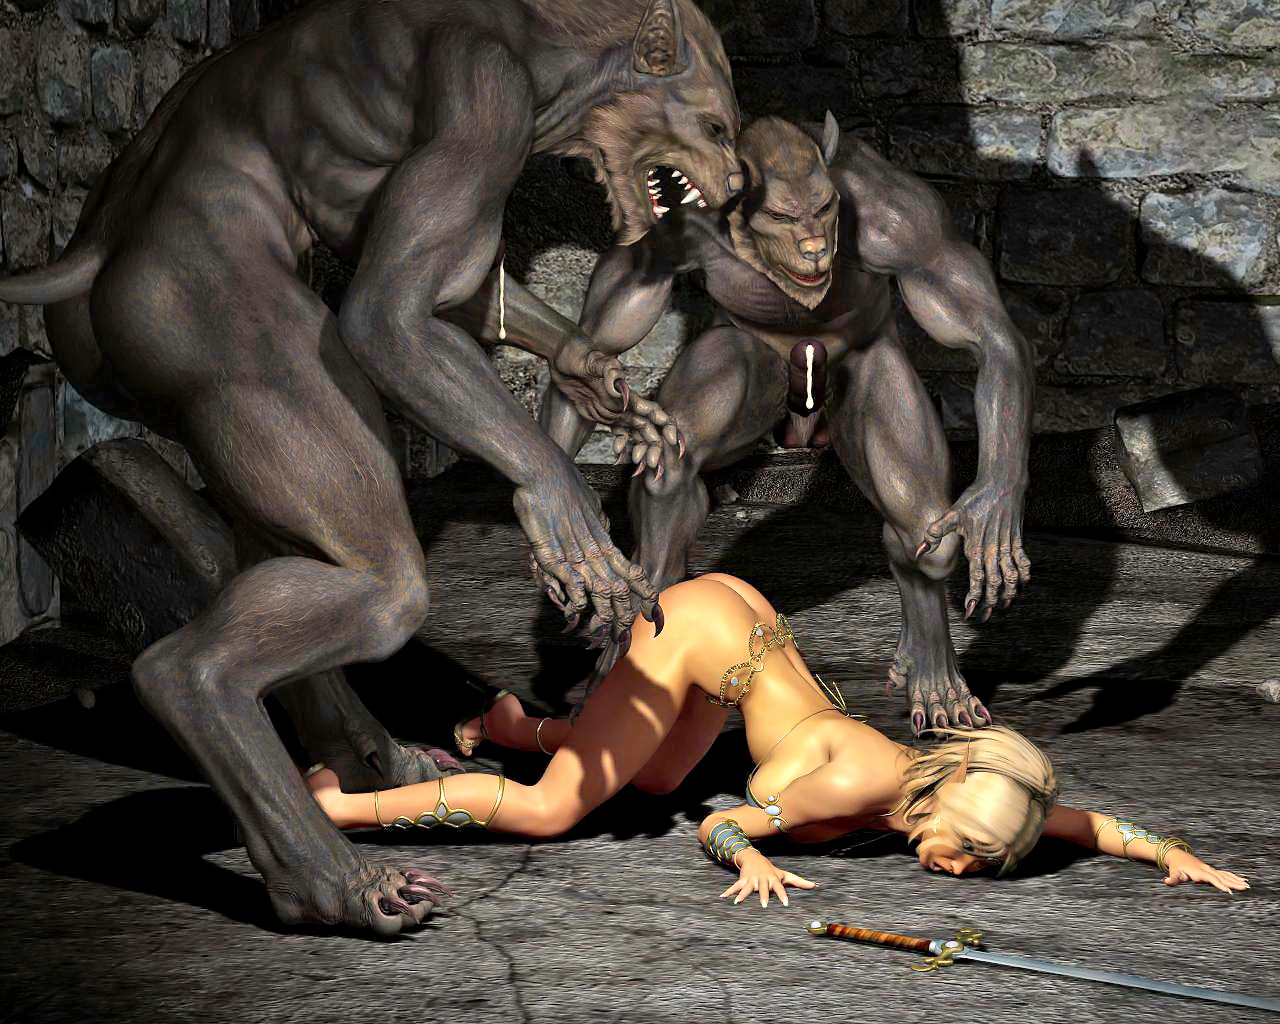 Forced Anal Monster - Brutally buttfucked by werewolves â€“ 3D RPG animation anal sex at  Hd3dMonsterSex.com